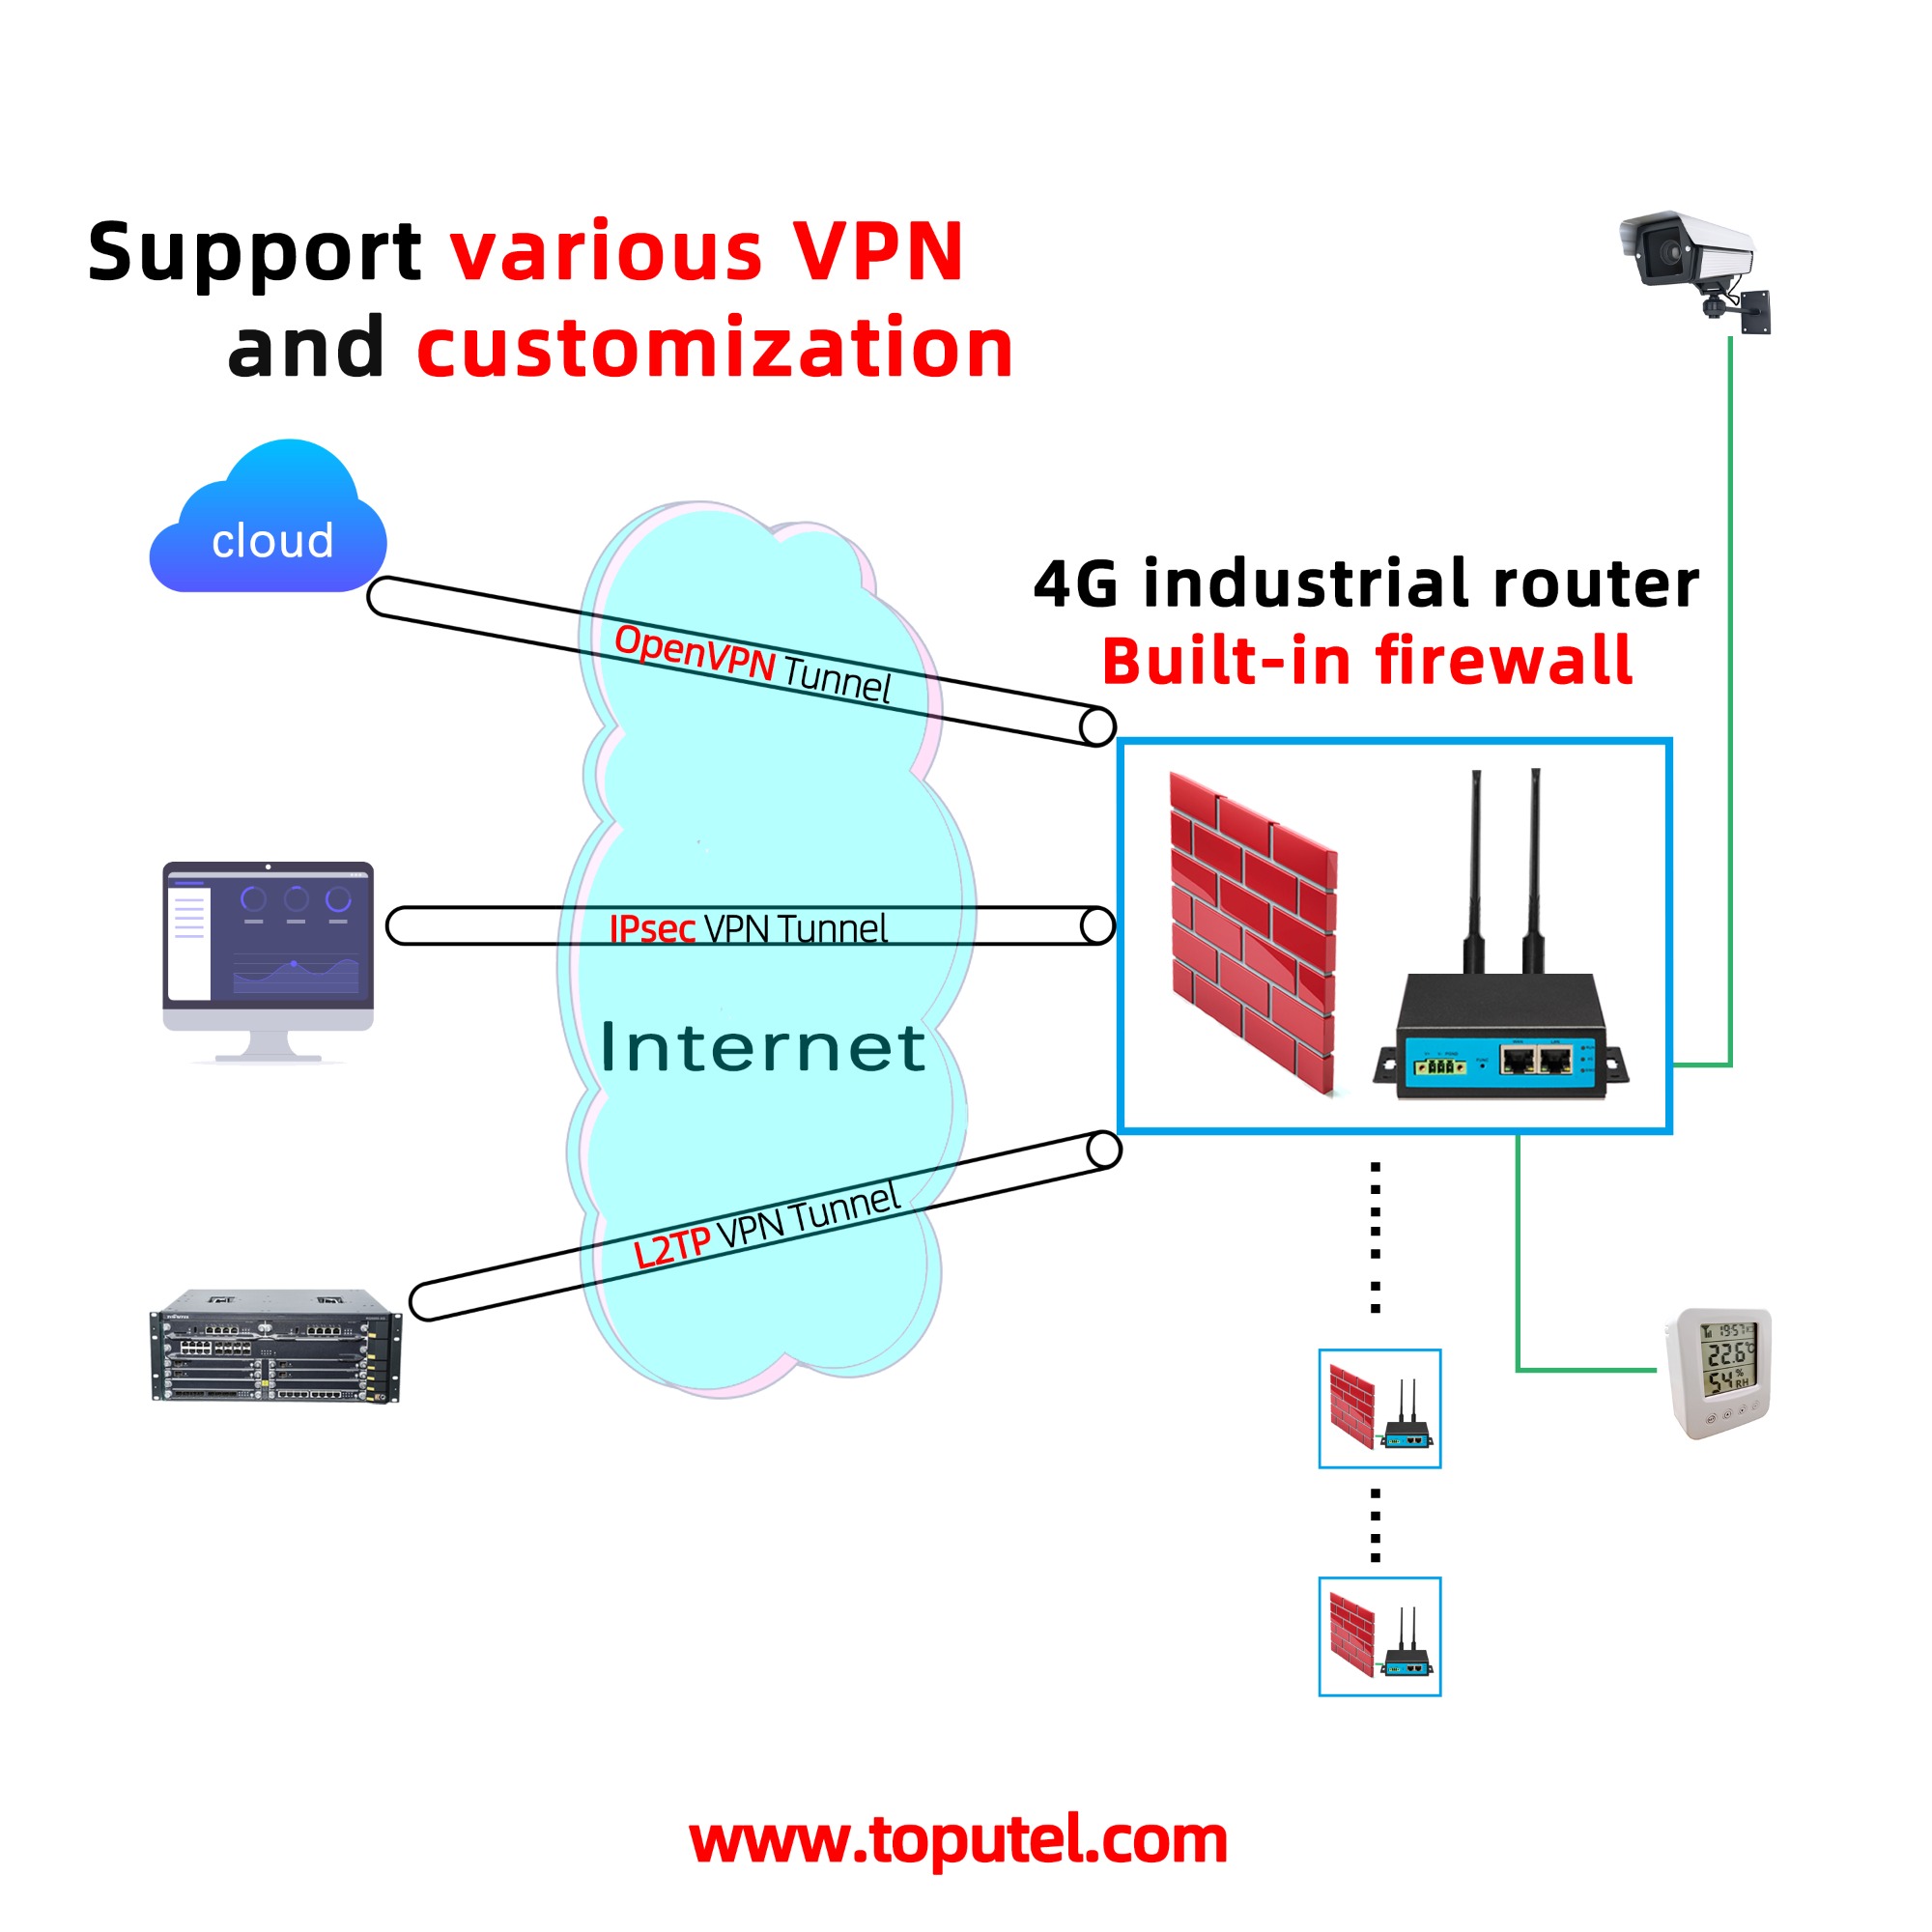 Built-in firewall and support various VPN and customization - 4G industrial router  RG4000-E